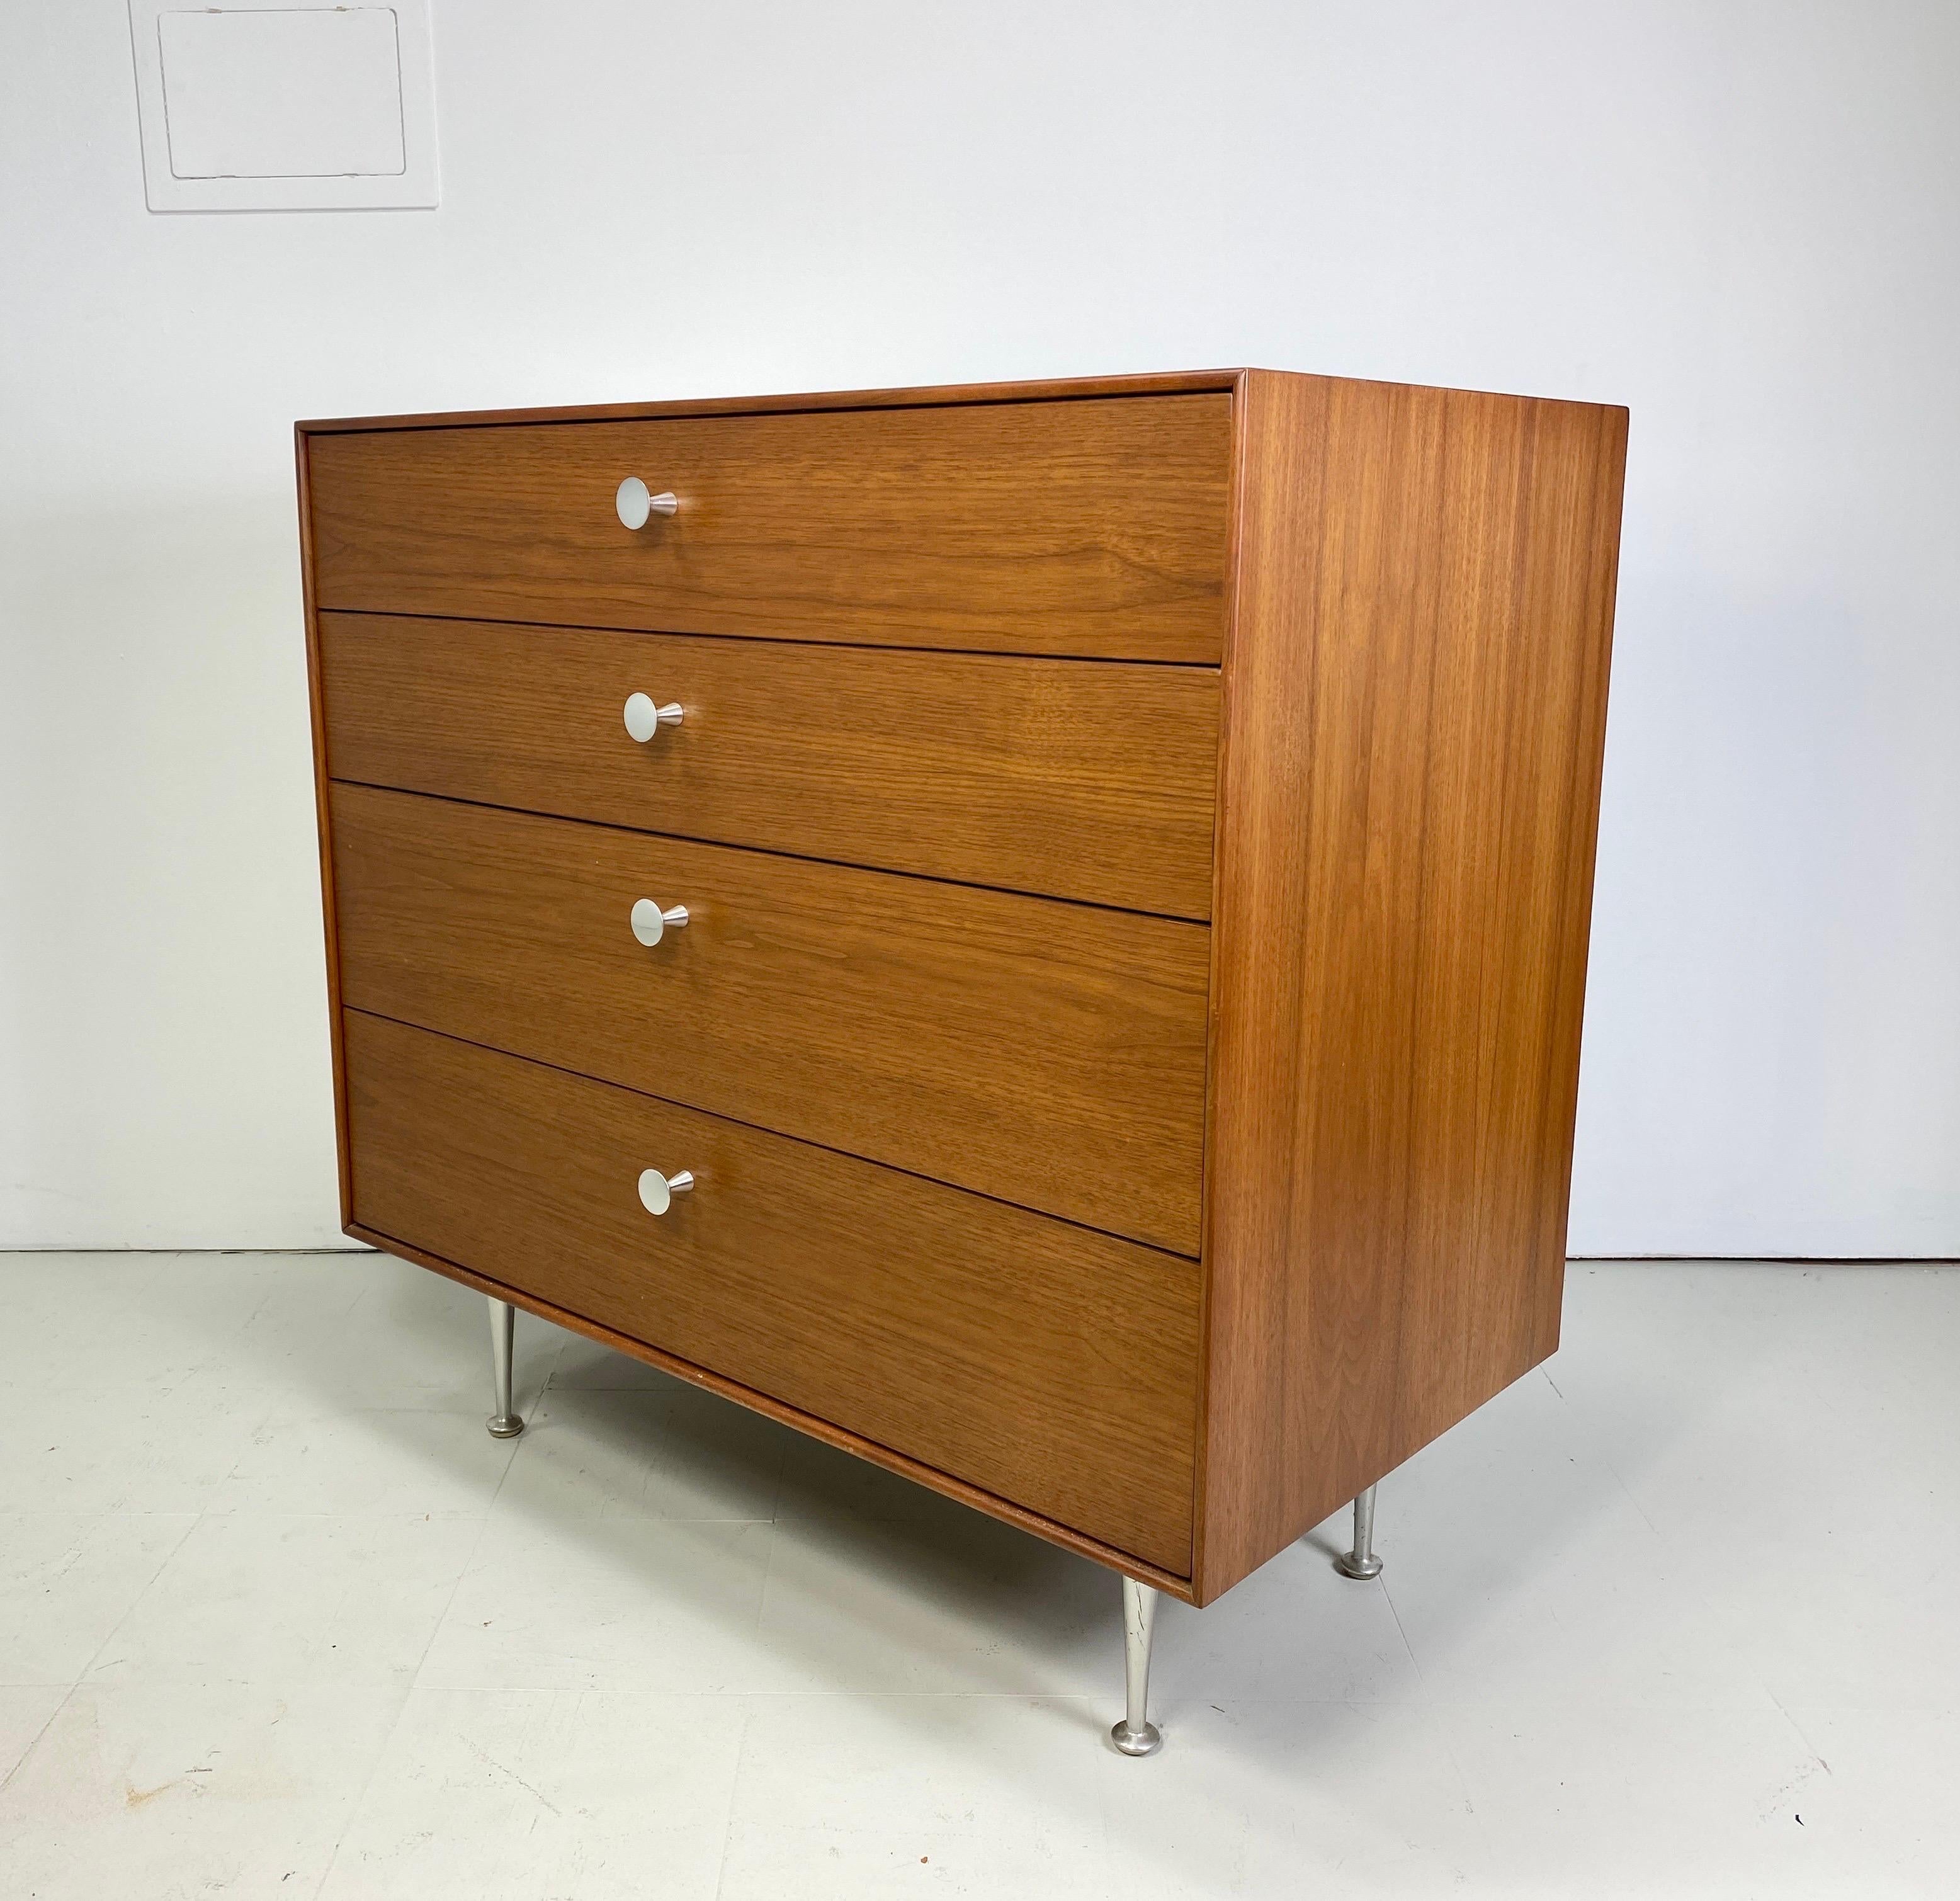 George Nelson for Herman Miller Walnut Thin Edge dresser. Dresser features aluminum legs and pulls. Original hang tags sold with cabinet. 1960s